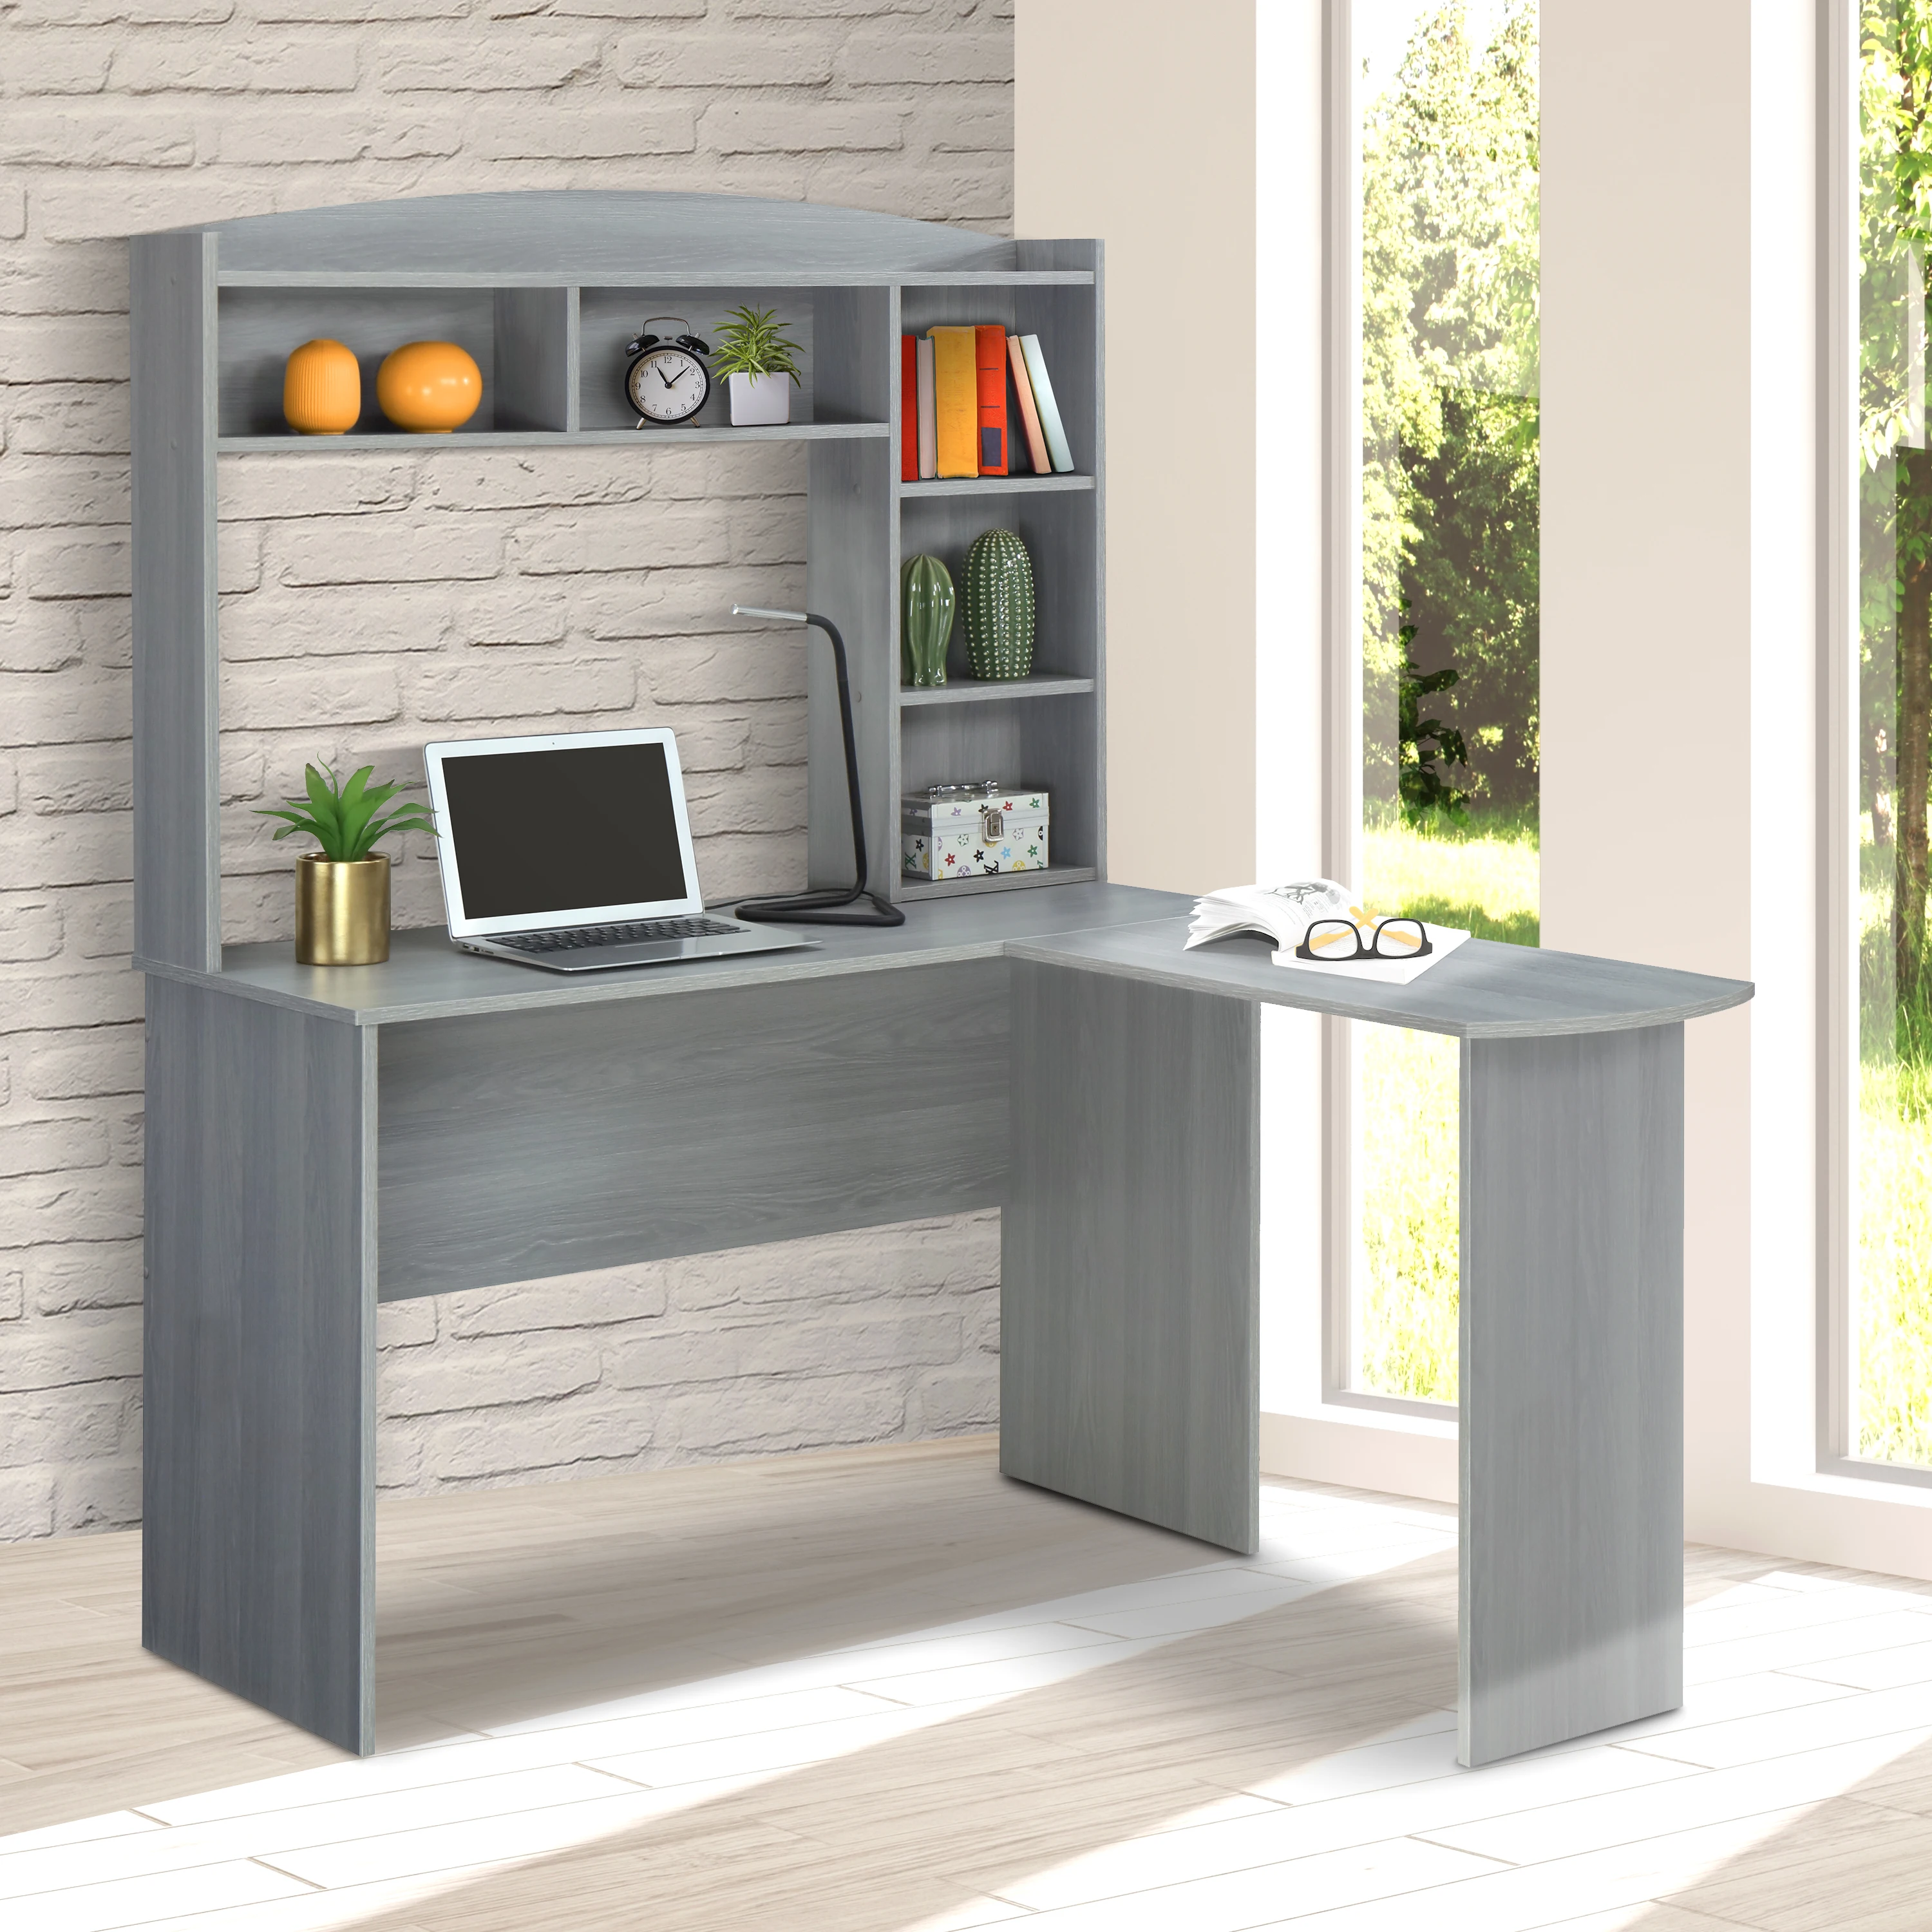 Modern Wood L-Shaped Computer Desk with Hutch Office Study Table Grey[US-W] bed headboard grey sonoma 200x1 5x80 cm engineered wood